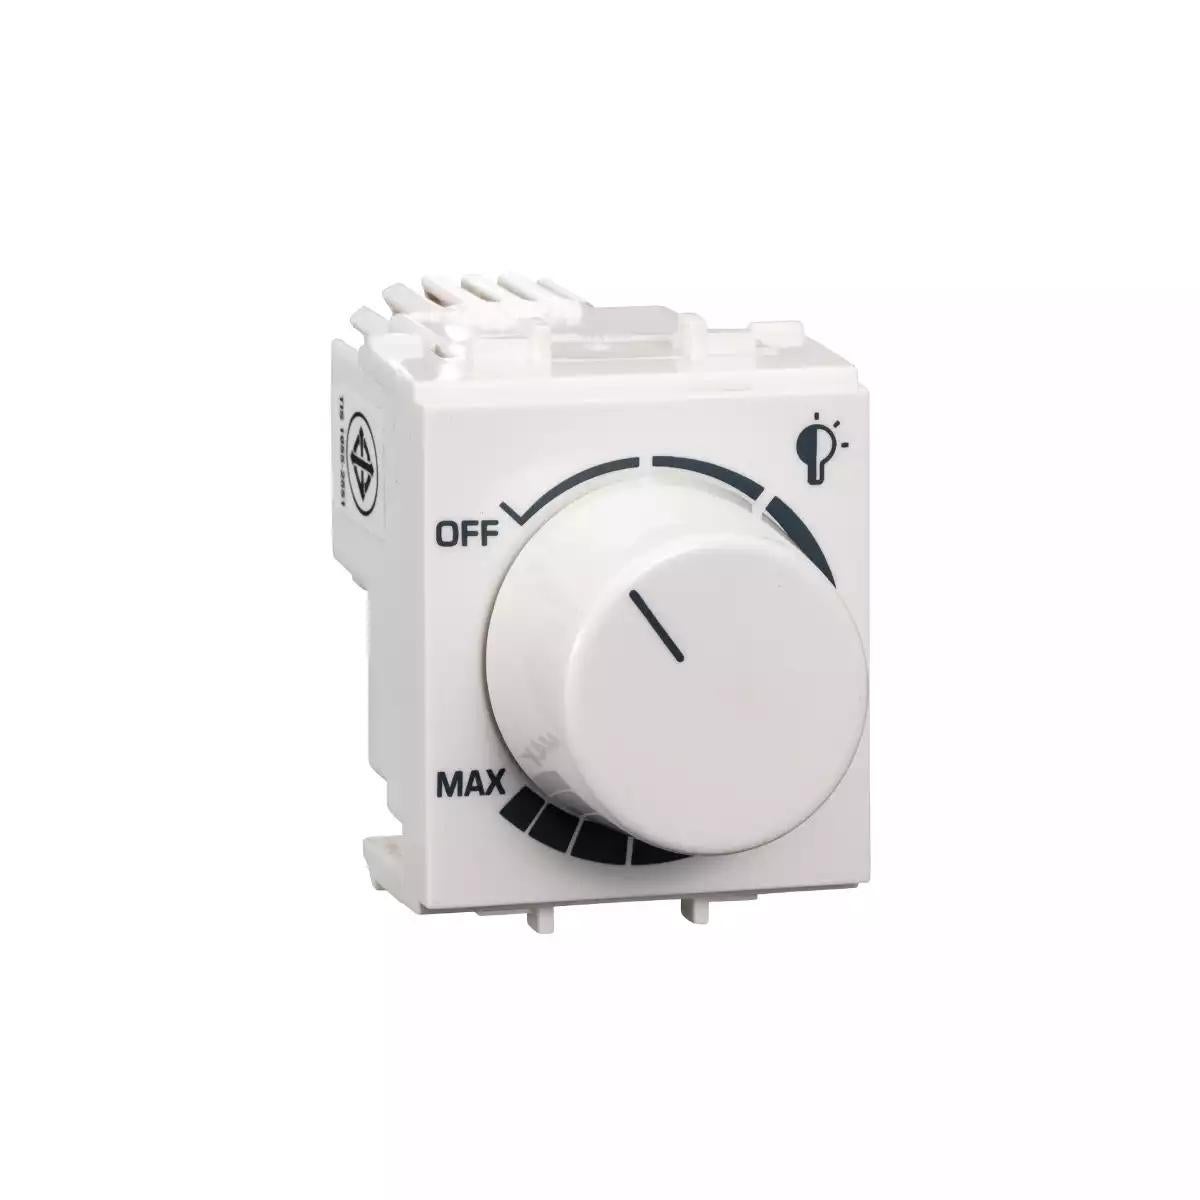 S-Flexi - 360W EMC dimmer with switch - white